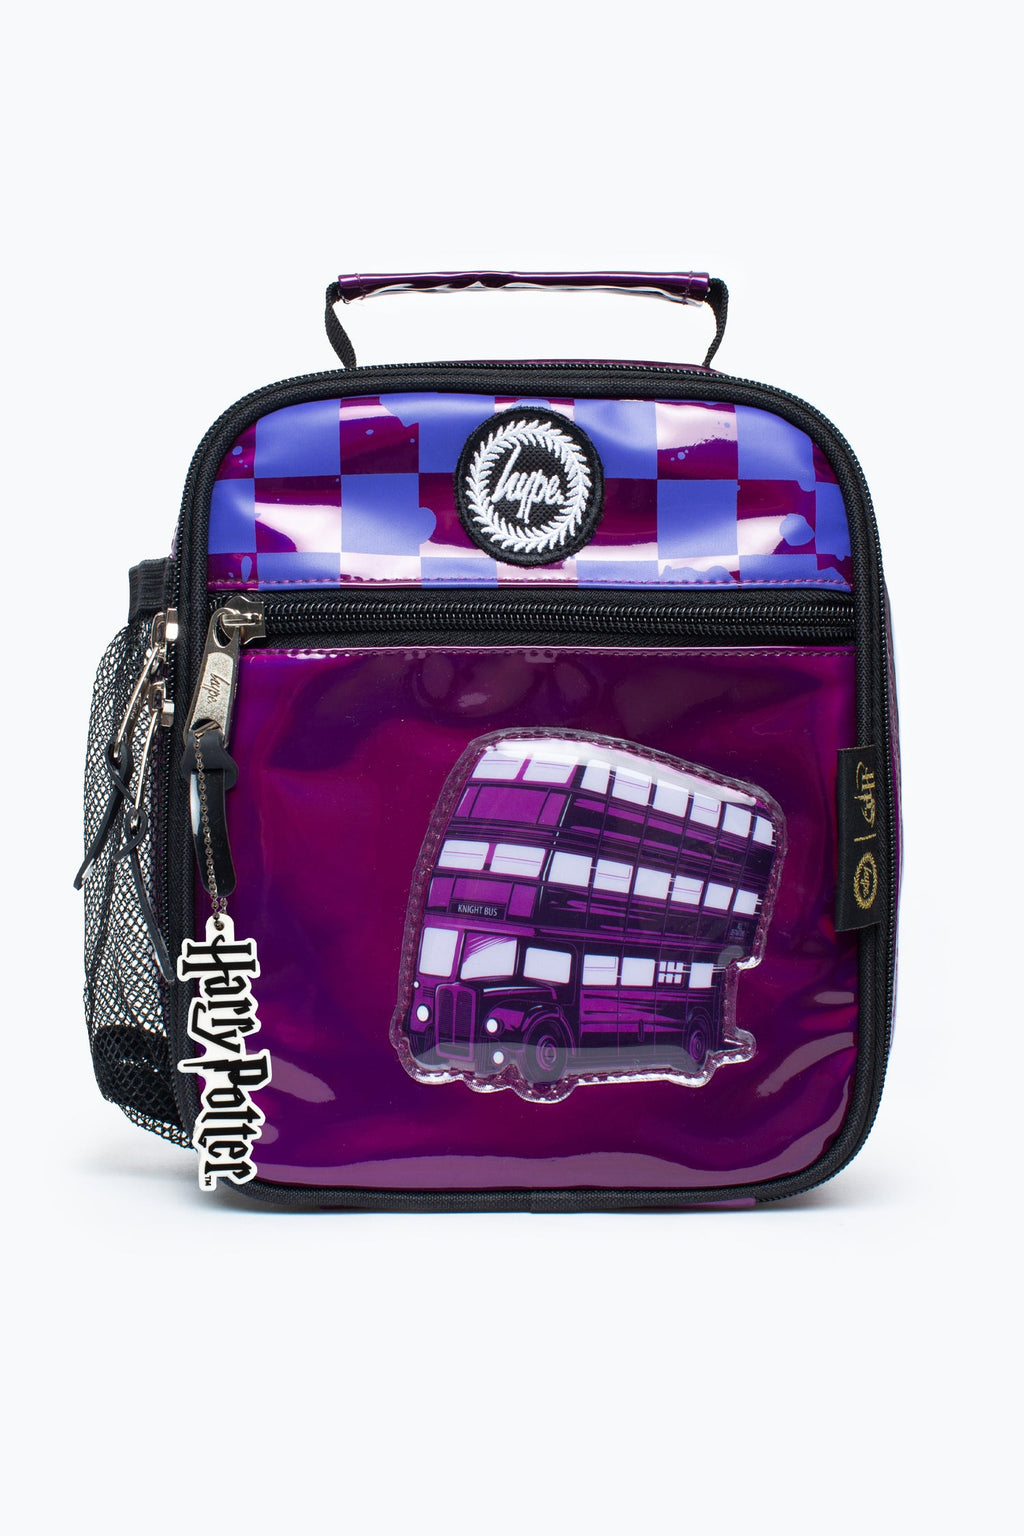 Harry Potter X Hype. Knight Bus Lunch Box